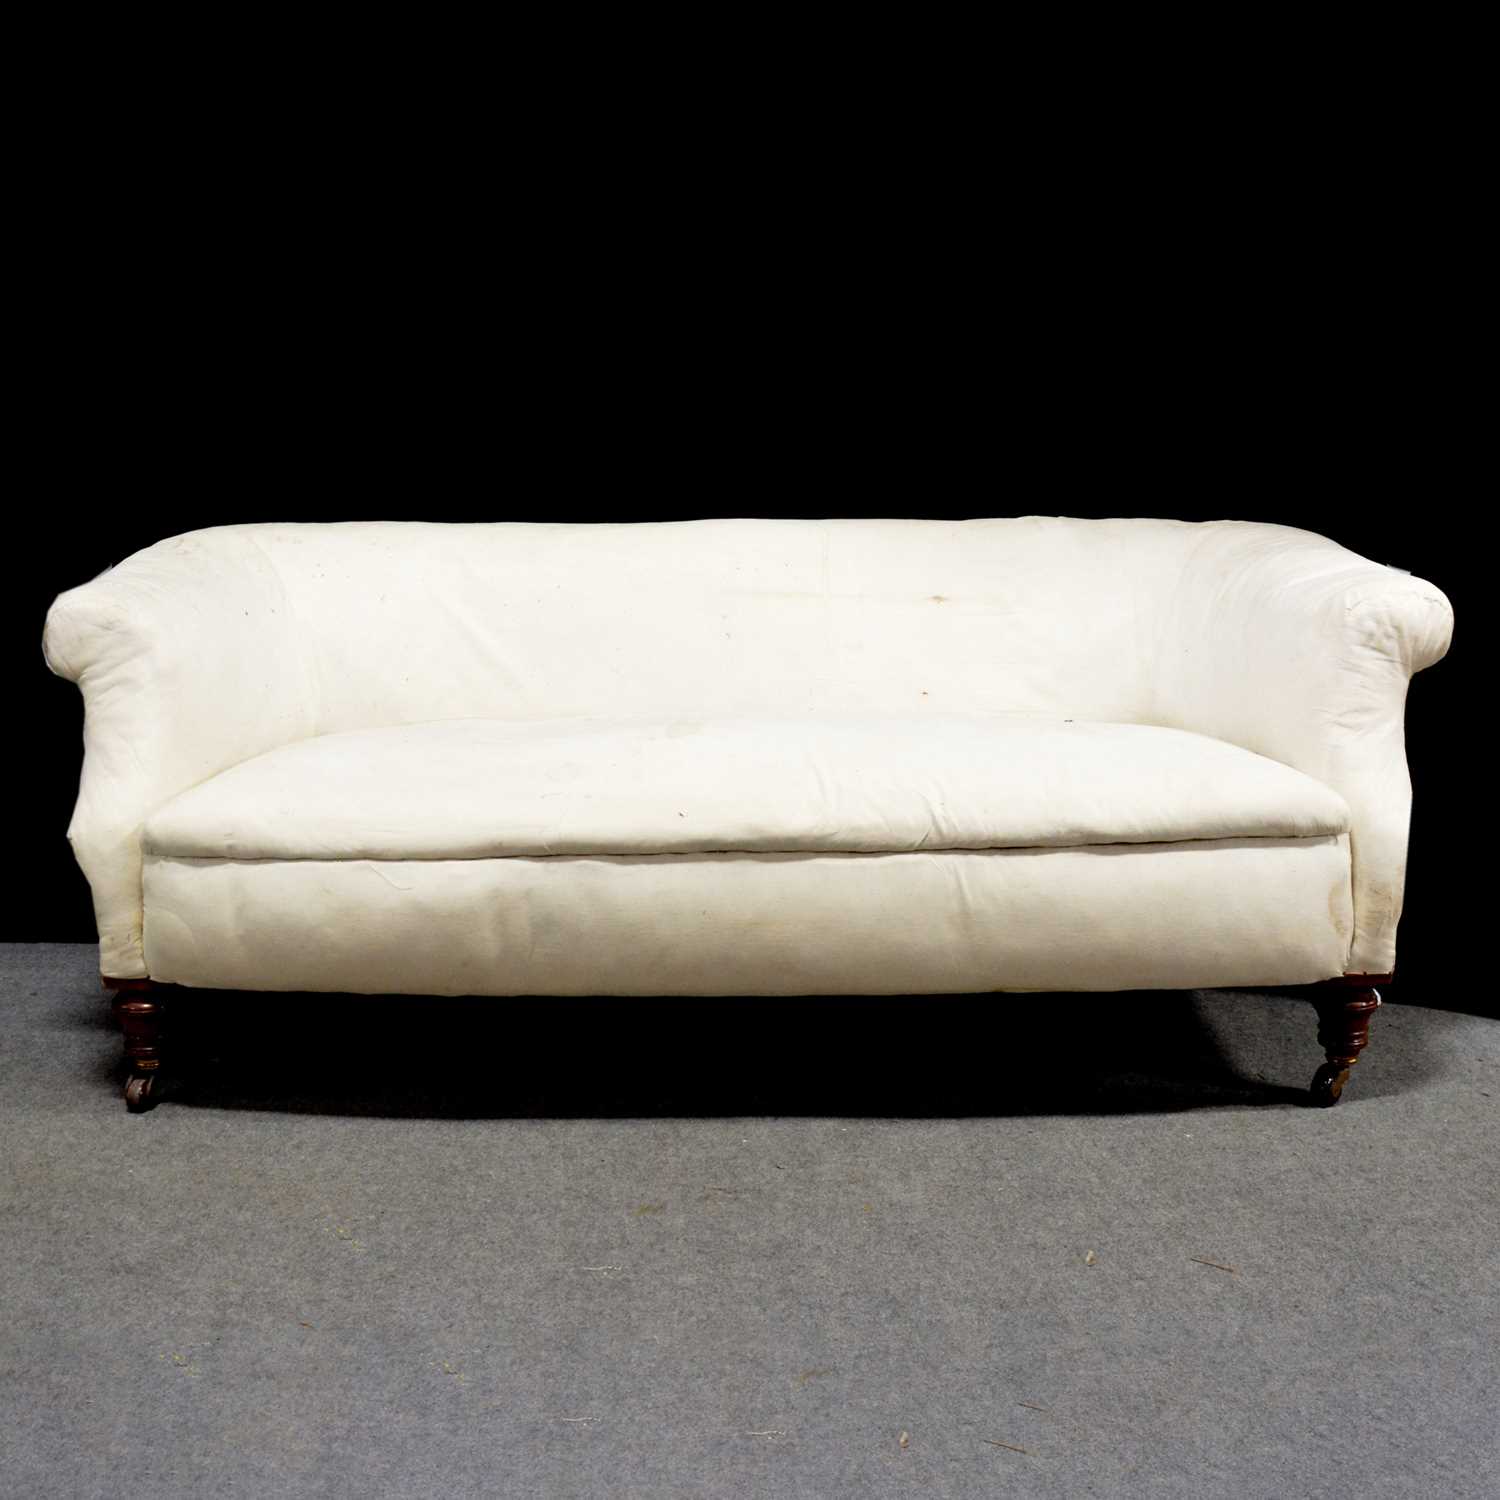 Small Edwardian Chesterfield settee.